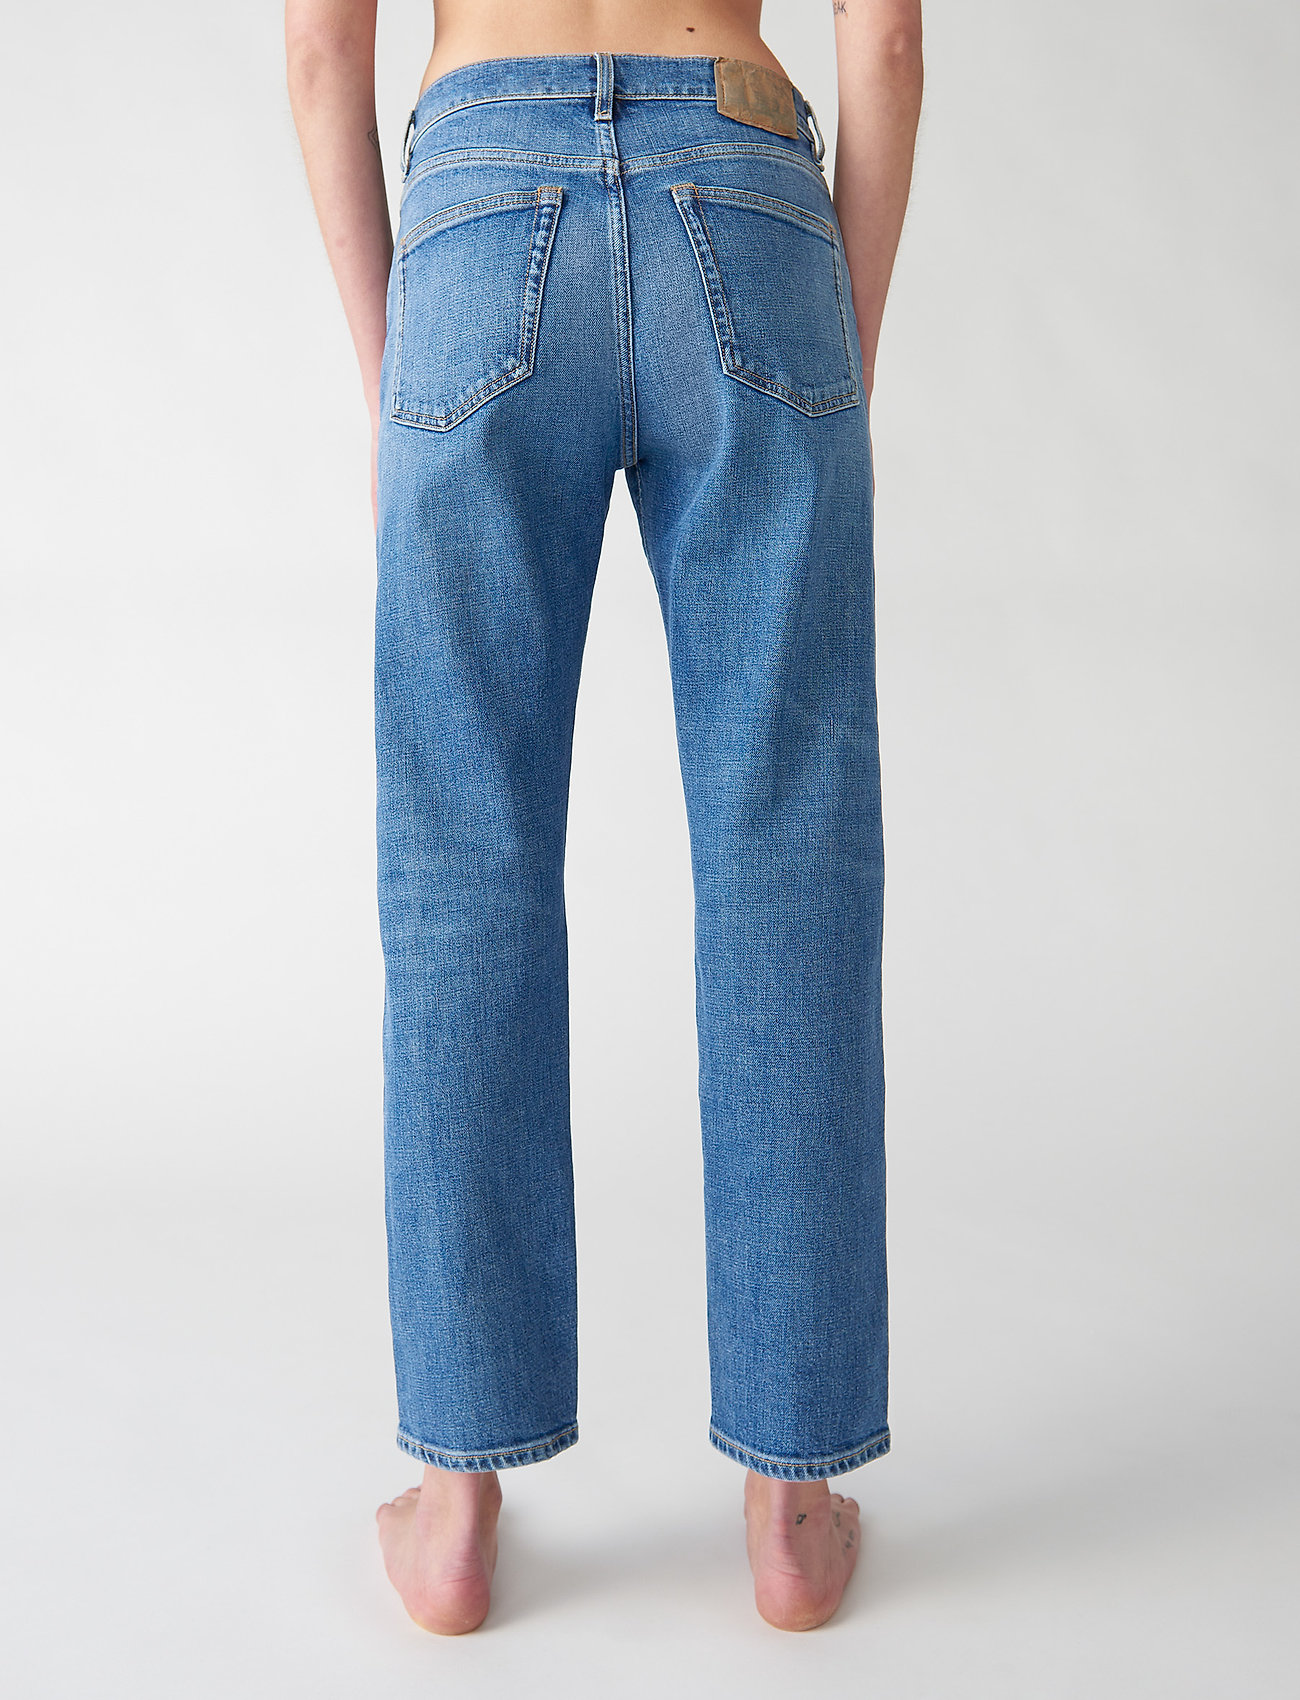 Jeanerica - CW002 Classic - straight jeans - mid vintage - 3